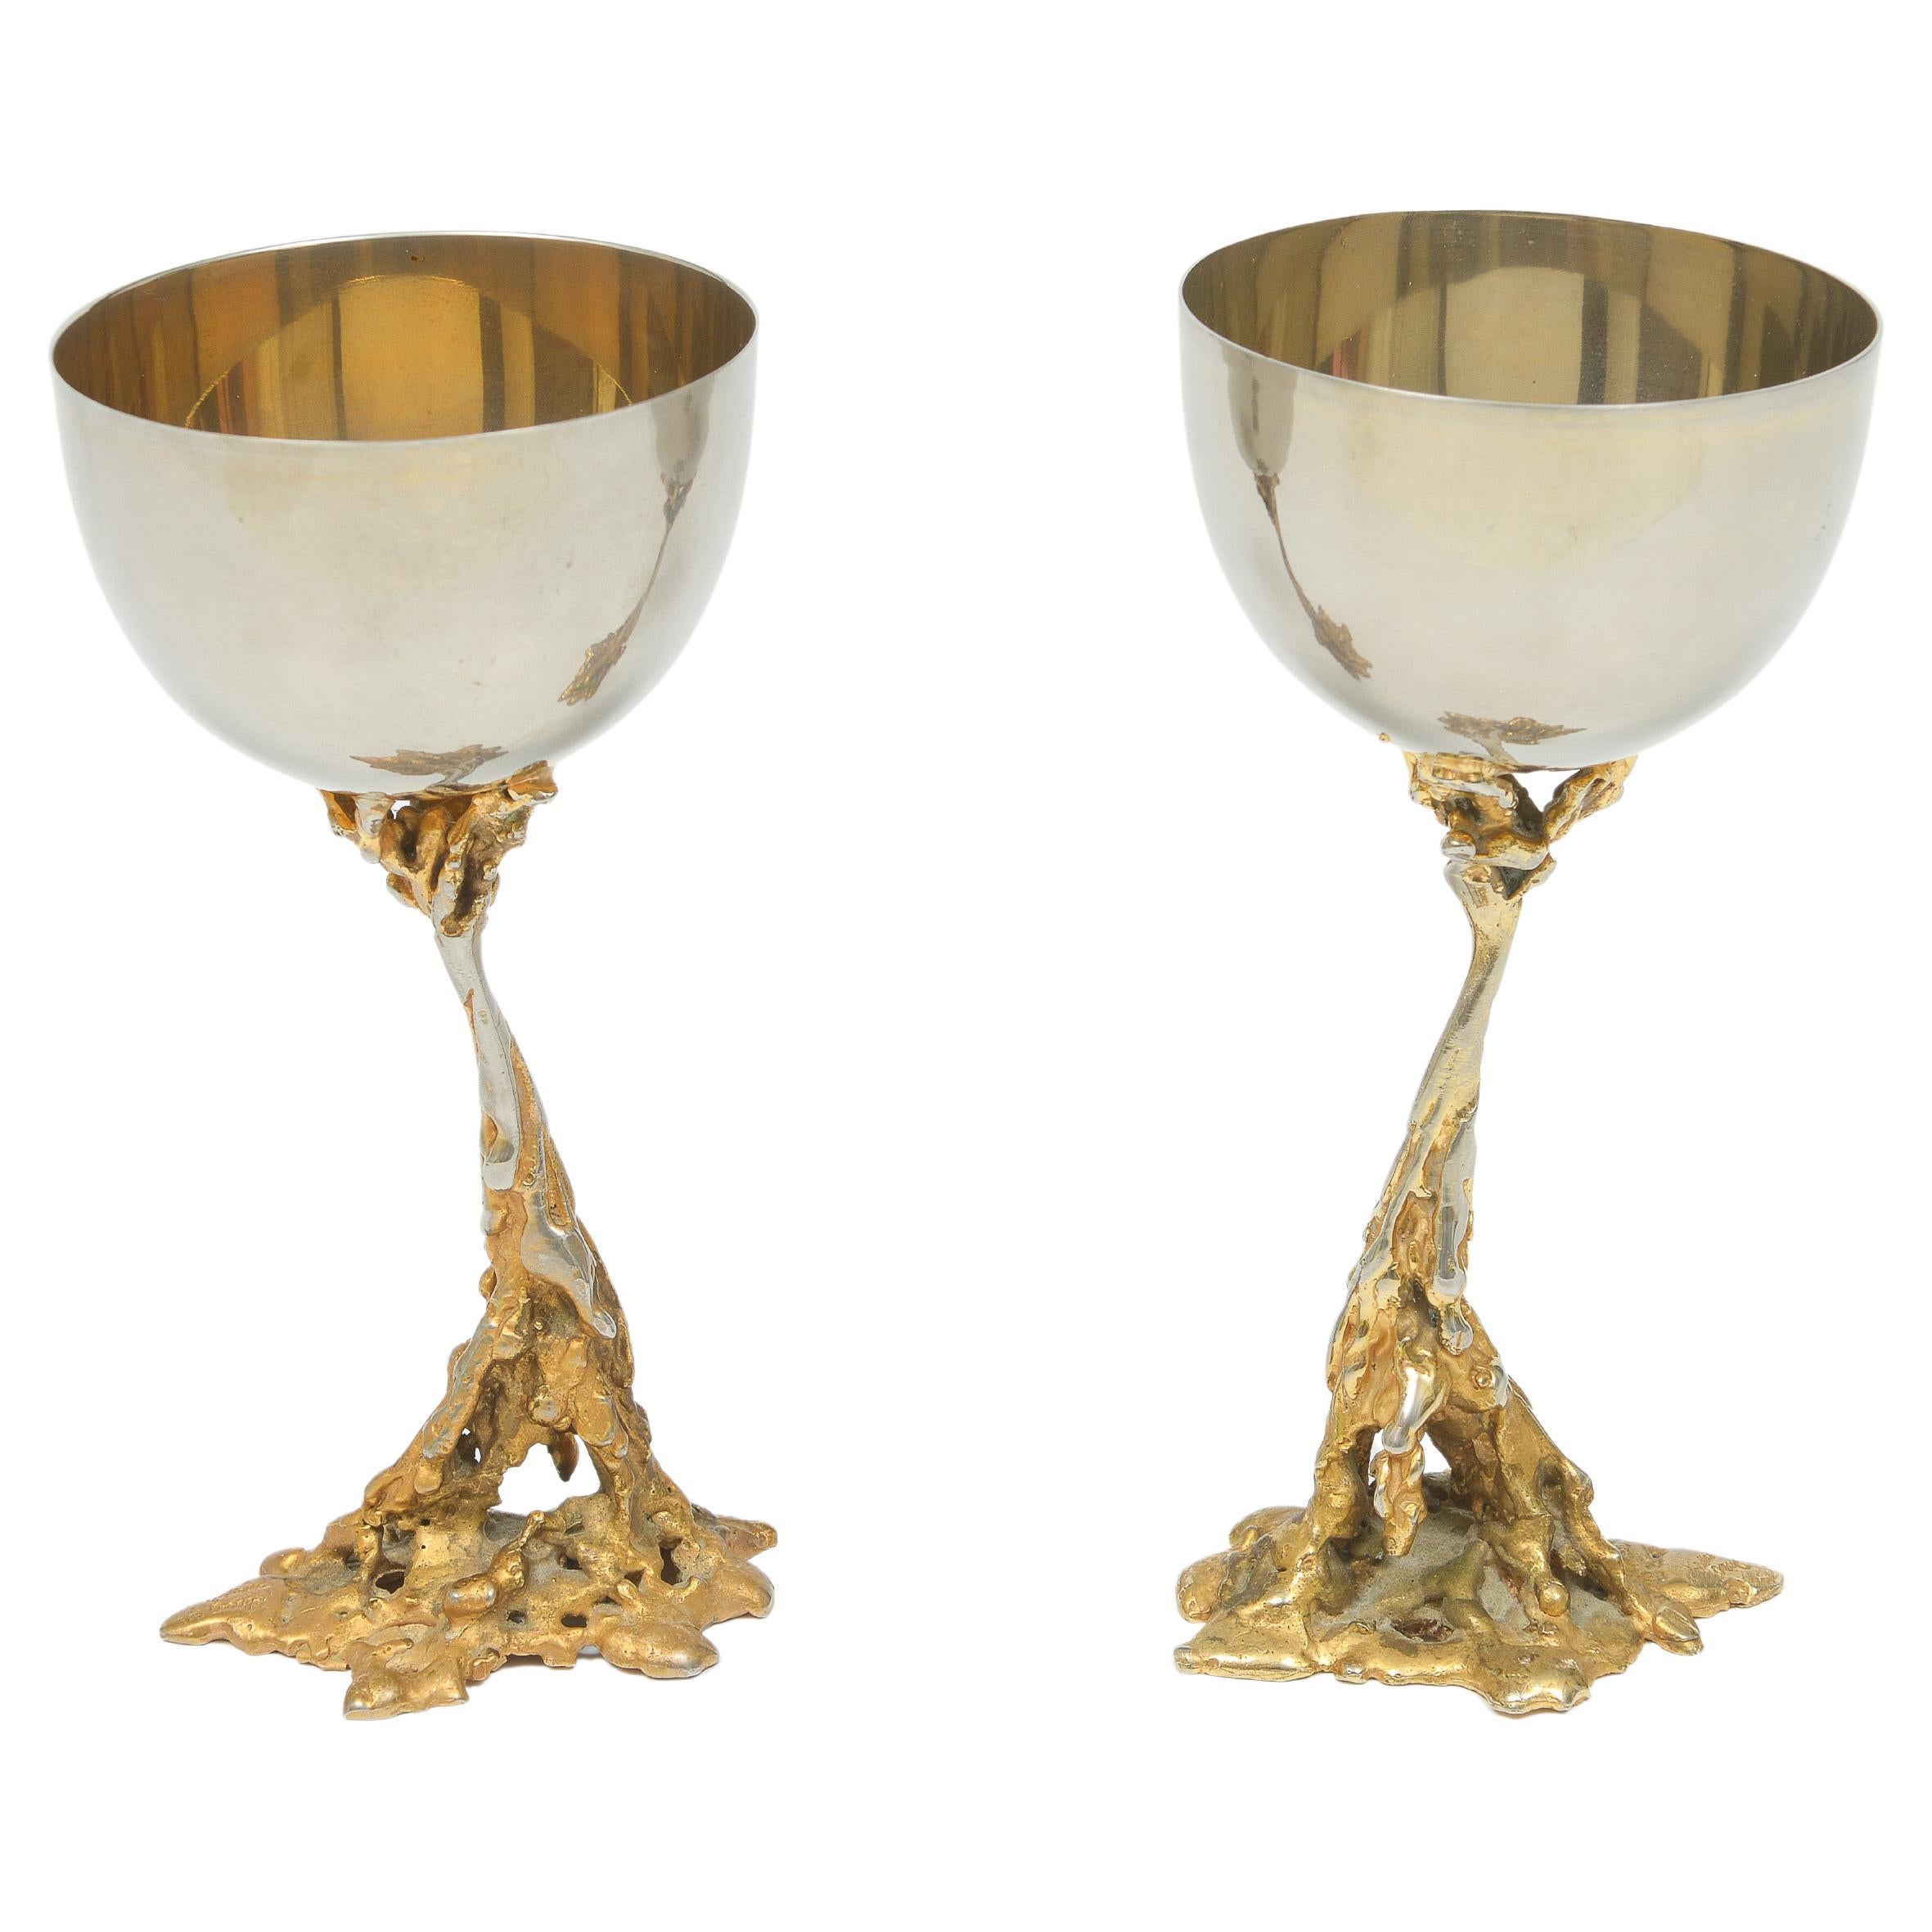 Gabriella Crespi Signed Brass Chalices Cups 1970 Midcentury Italian For Sale